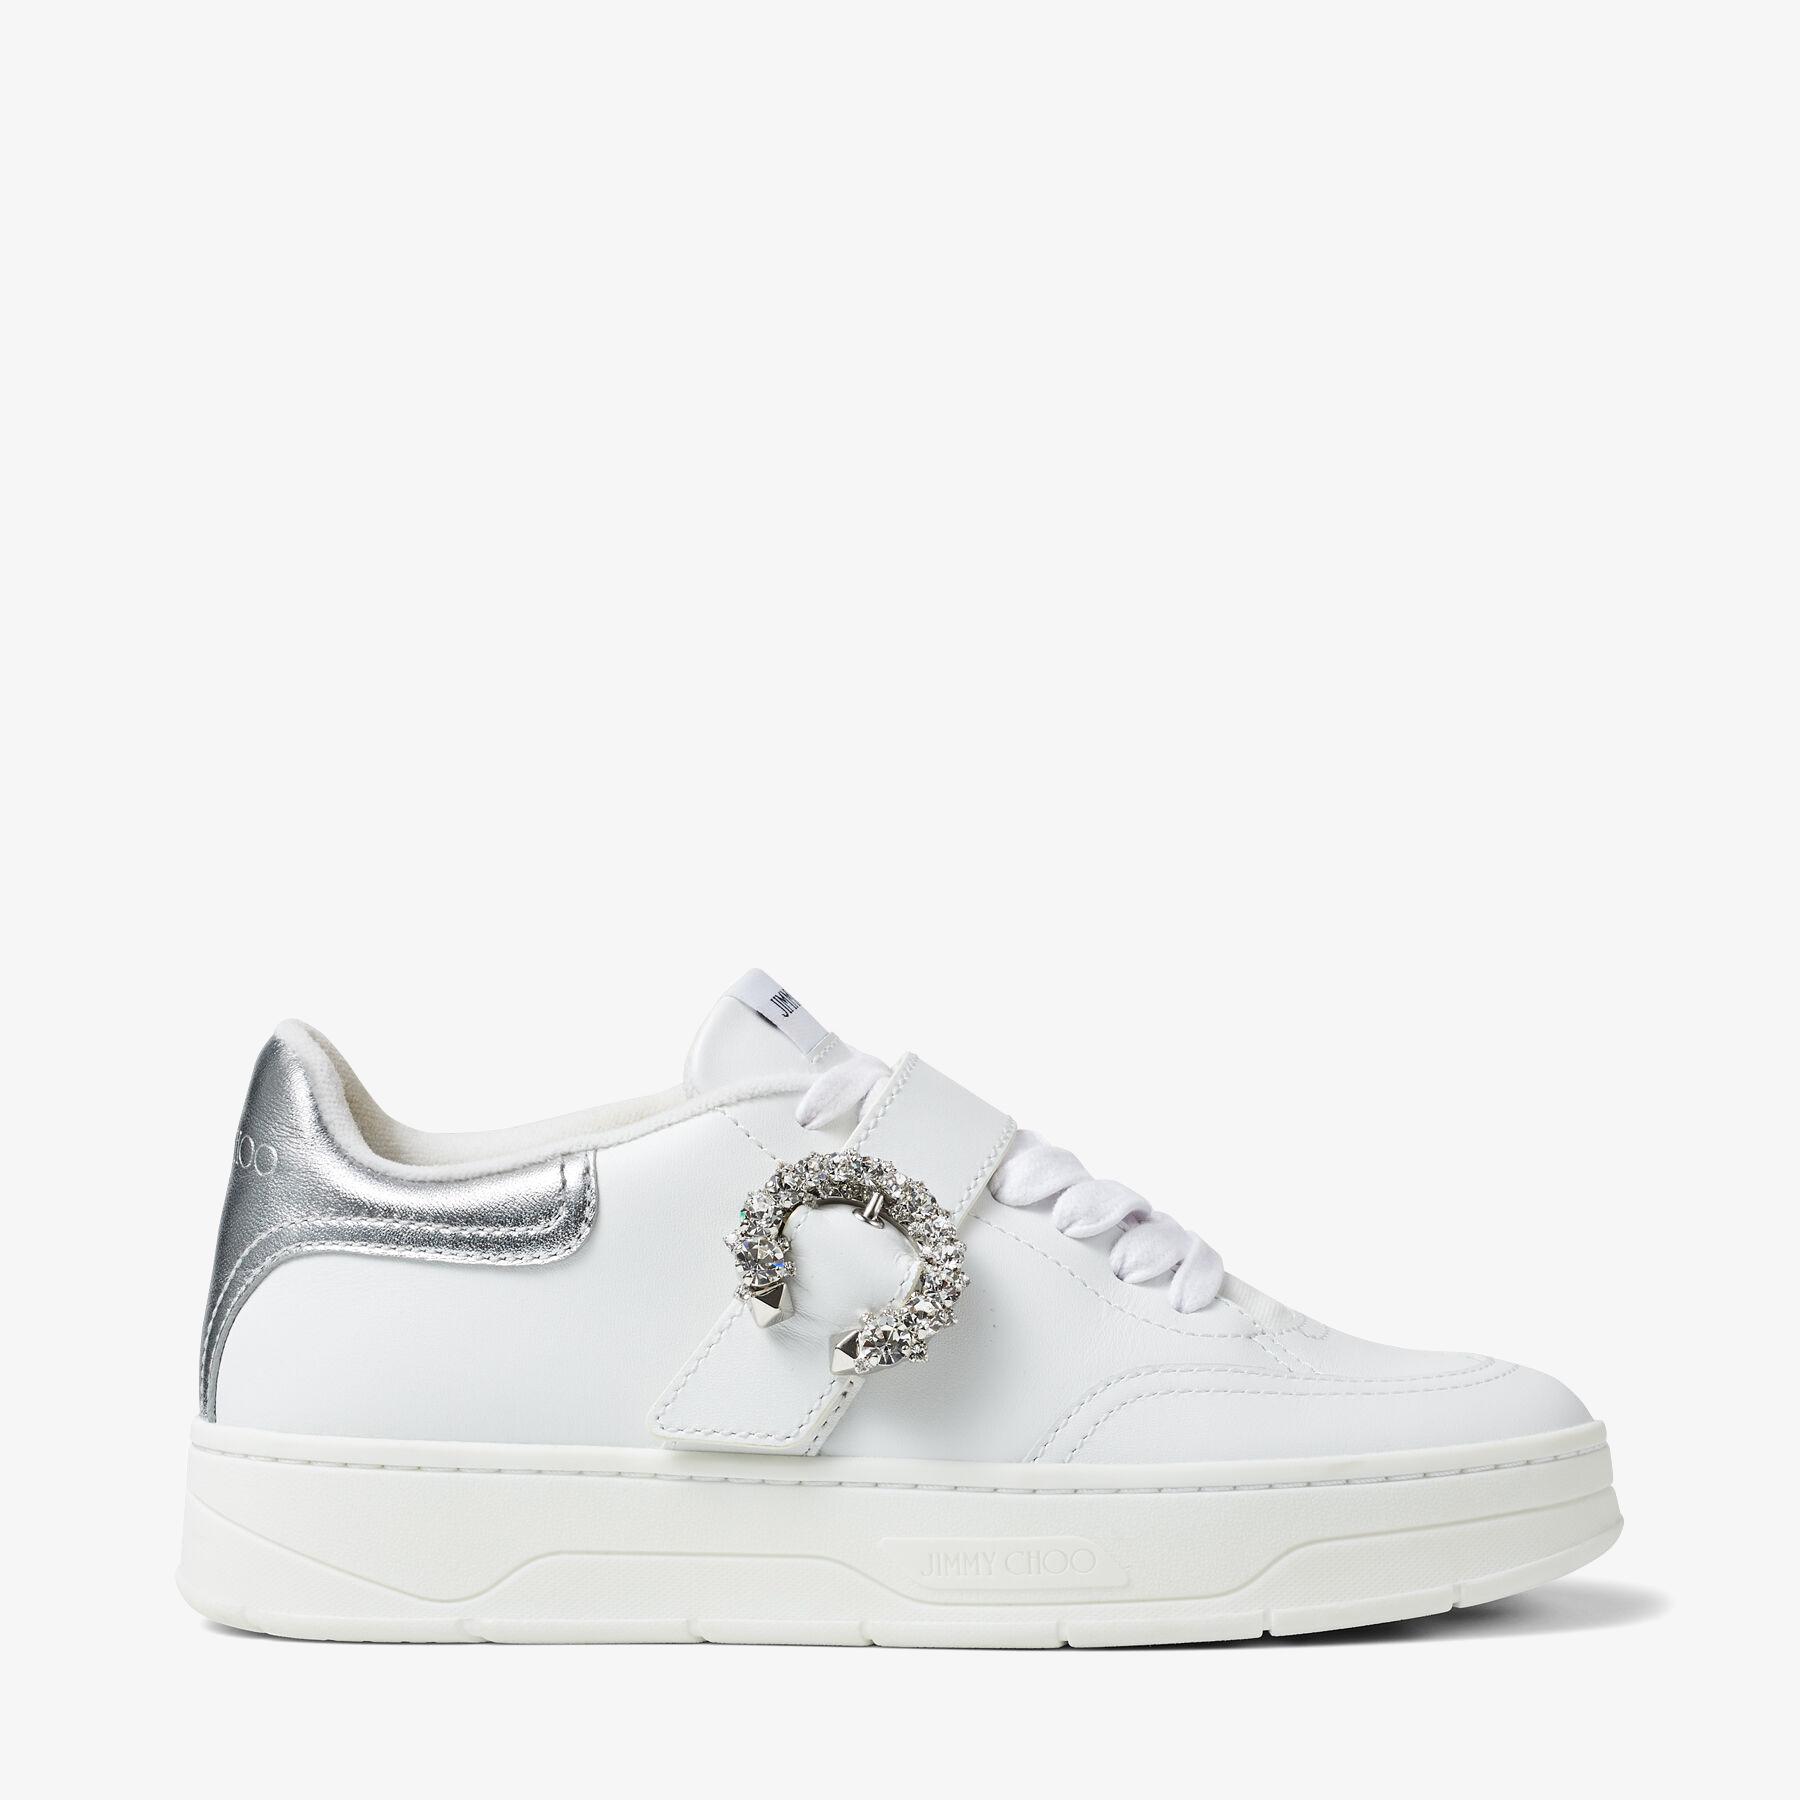 Jimmy Choo Leather Osaka Lace Up in v White/Silver/Crystal (White 